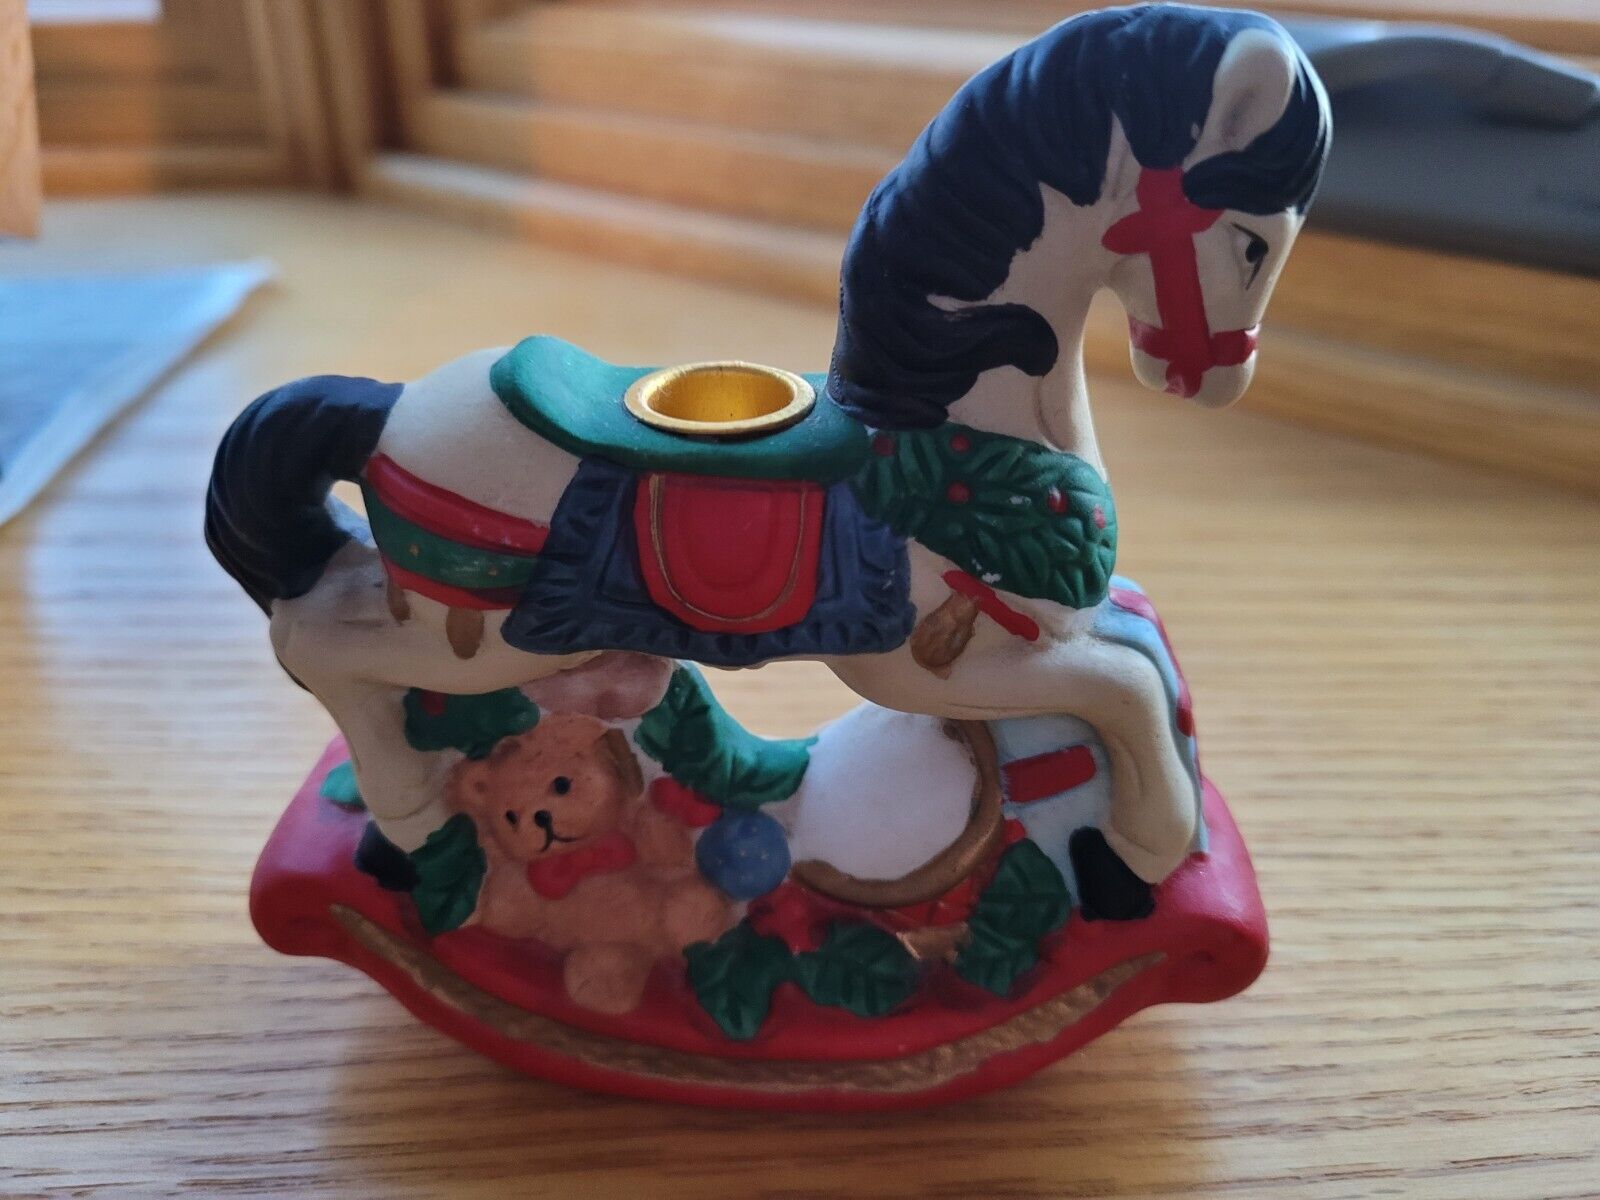 Vintage Midwest of Cannon Falls ROCKING HORSE Candle holder Christmas Ceramic